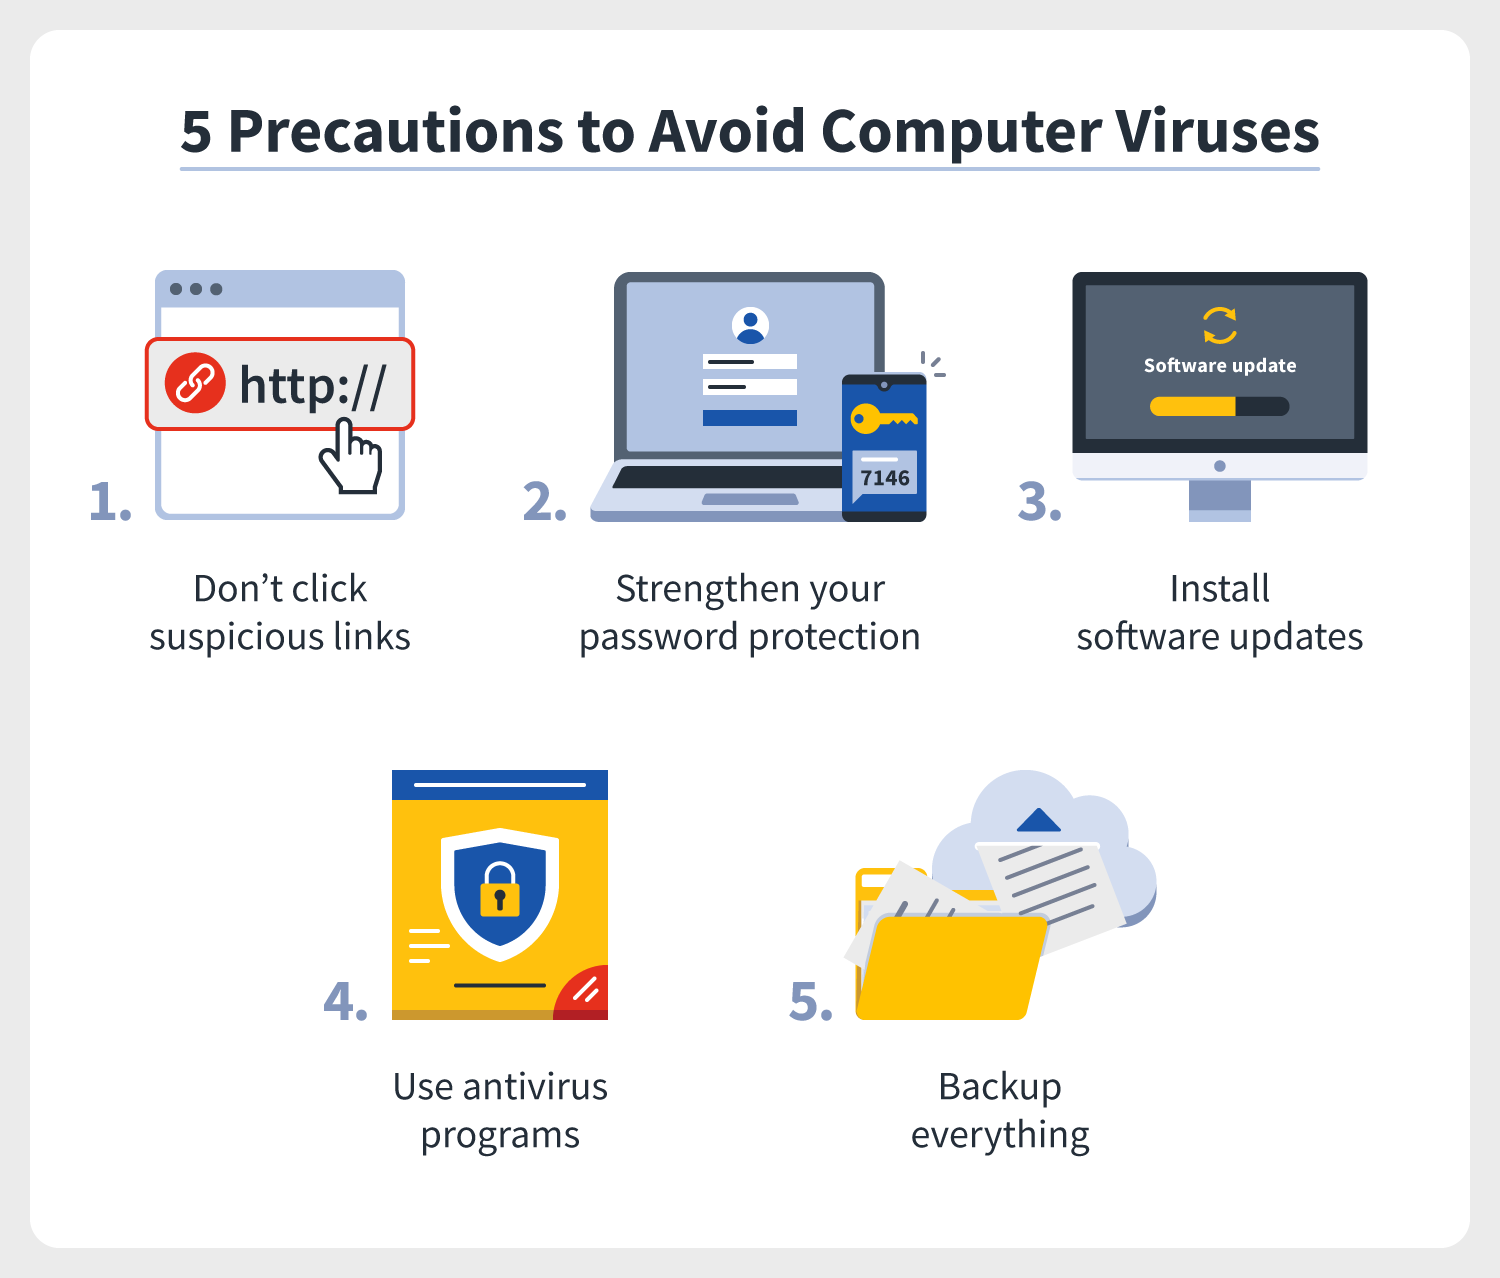 Do these 5 things to avoid computer viruses: Don’t click on suspicious links, strengthen your password protection, install software updates, use antivirus programs, and backup everything. 